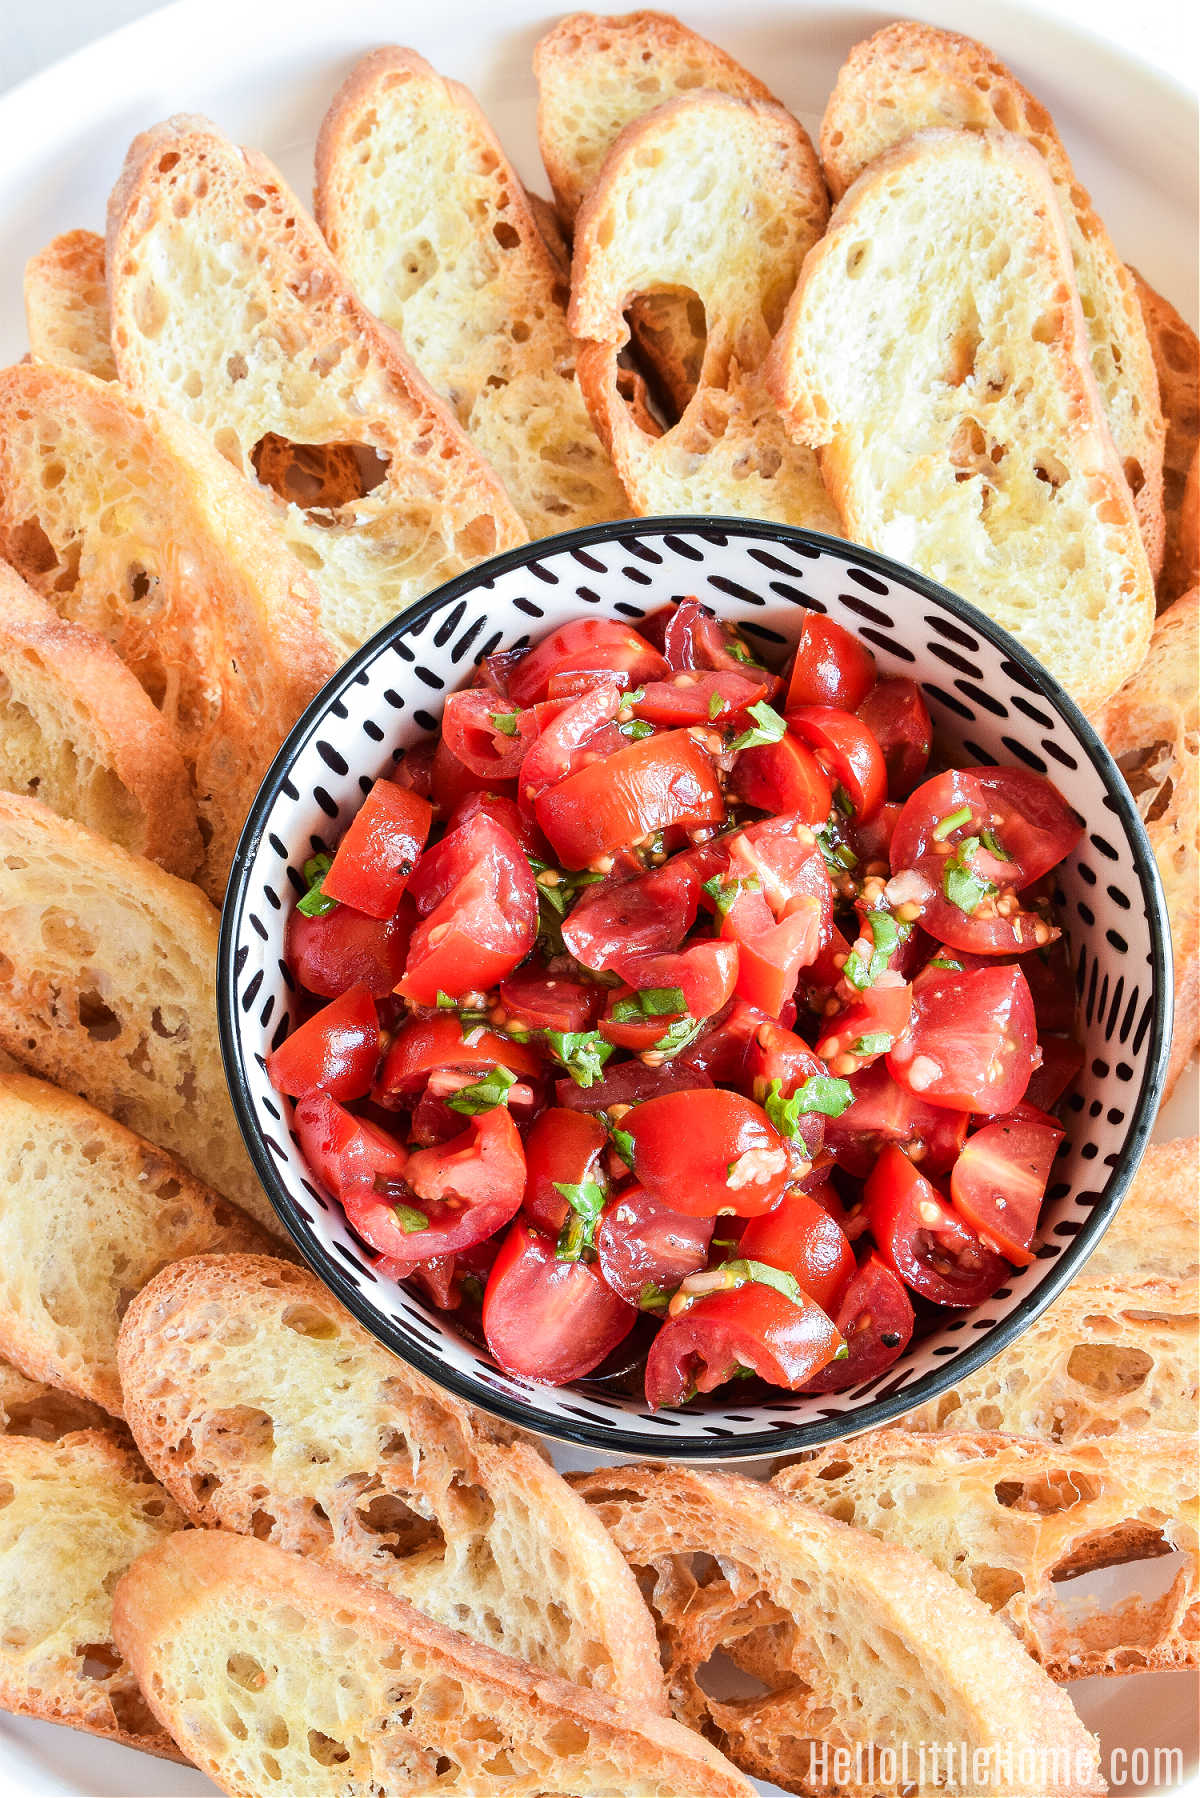 The finished crostini surrounding a bowl of tomato basil topping on a white tray.